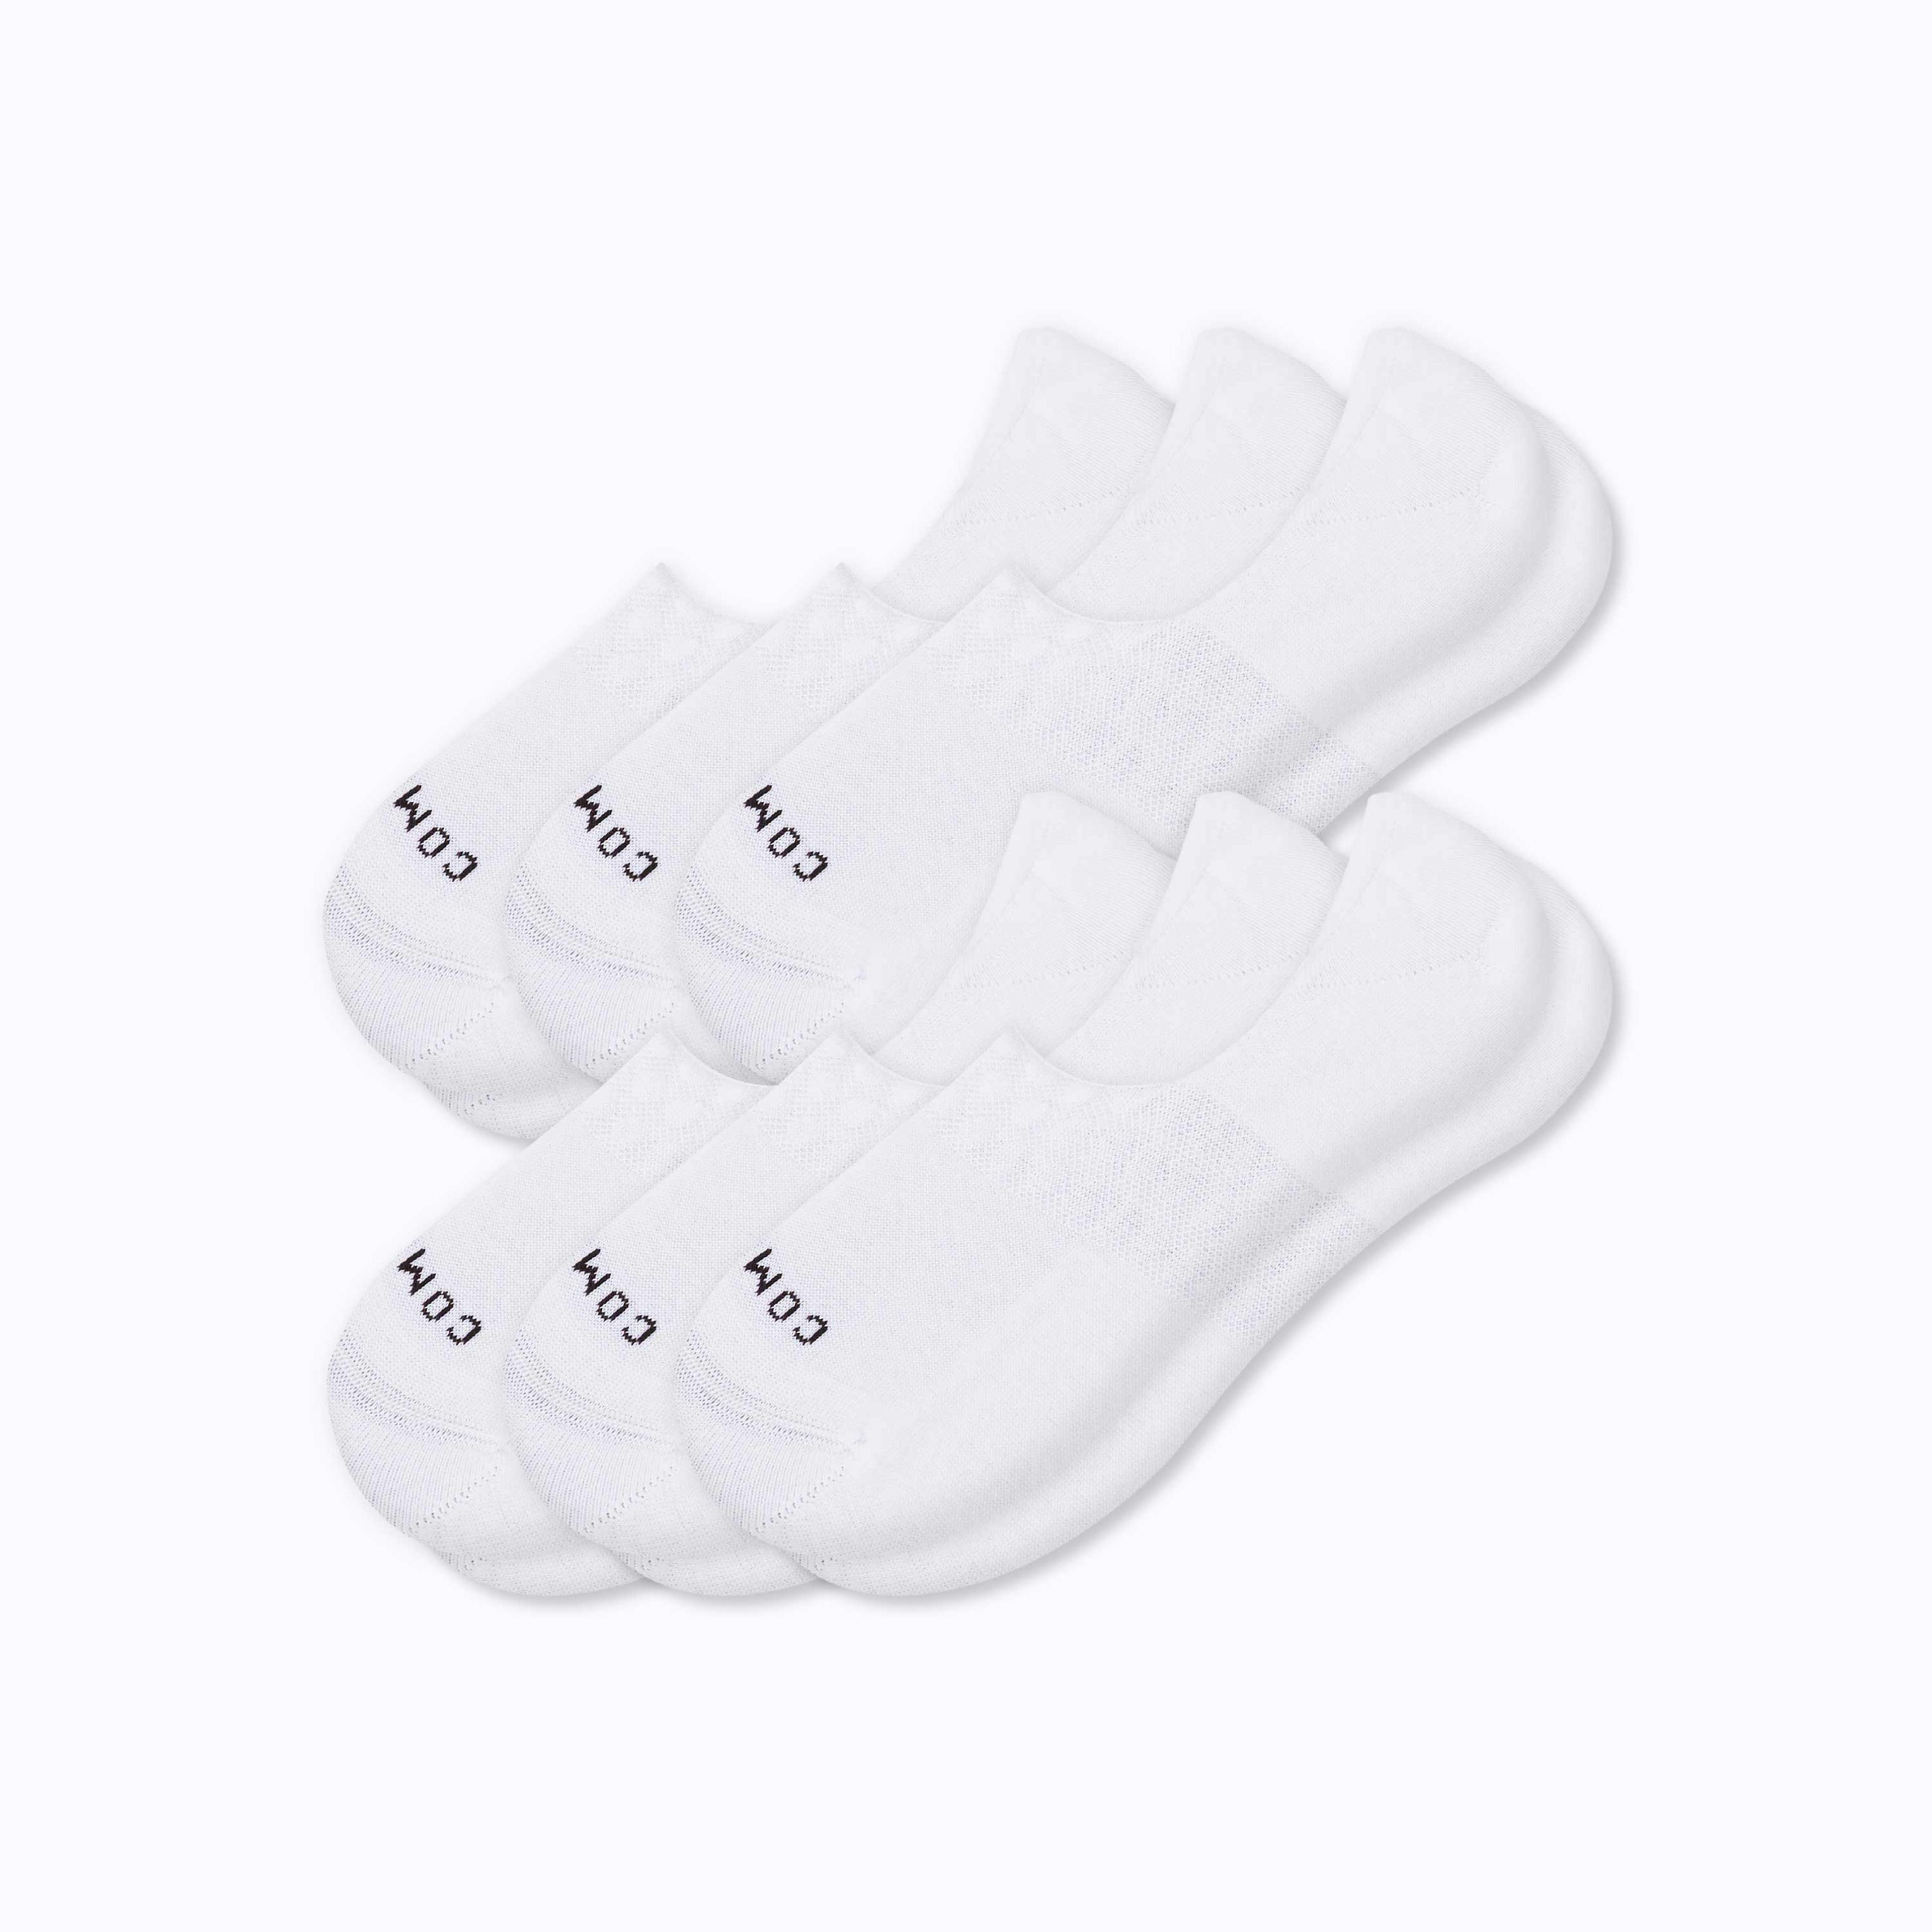 Combed Cotton No Show Socks – 6 Pack